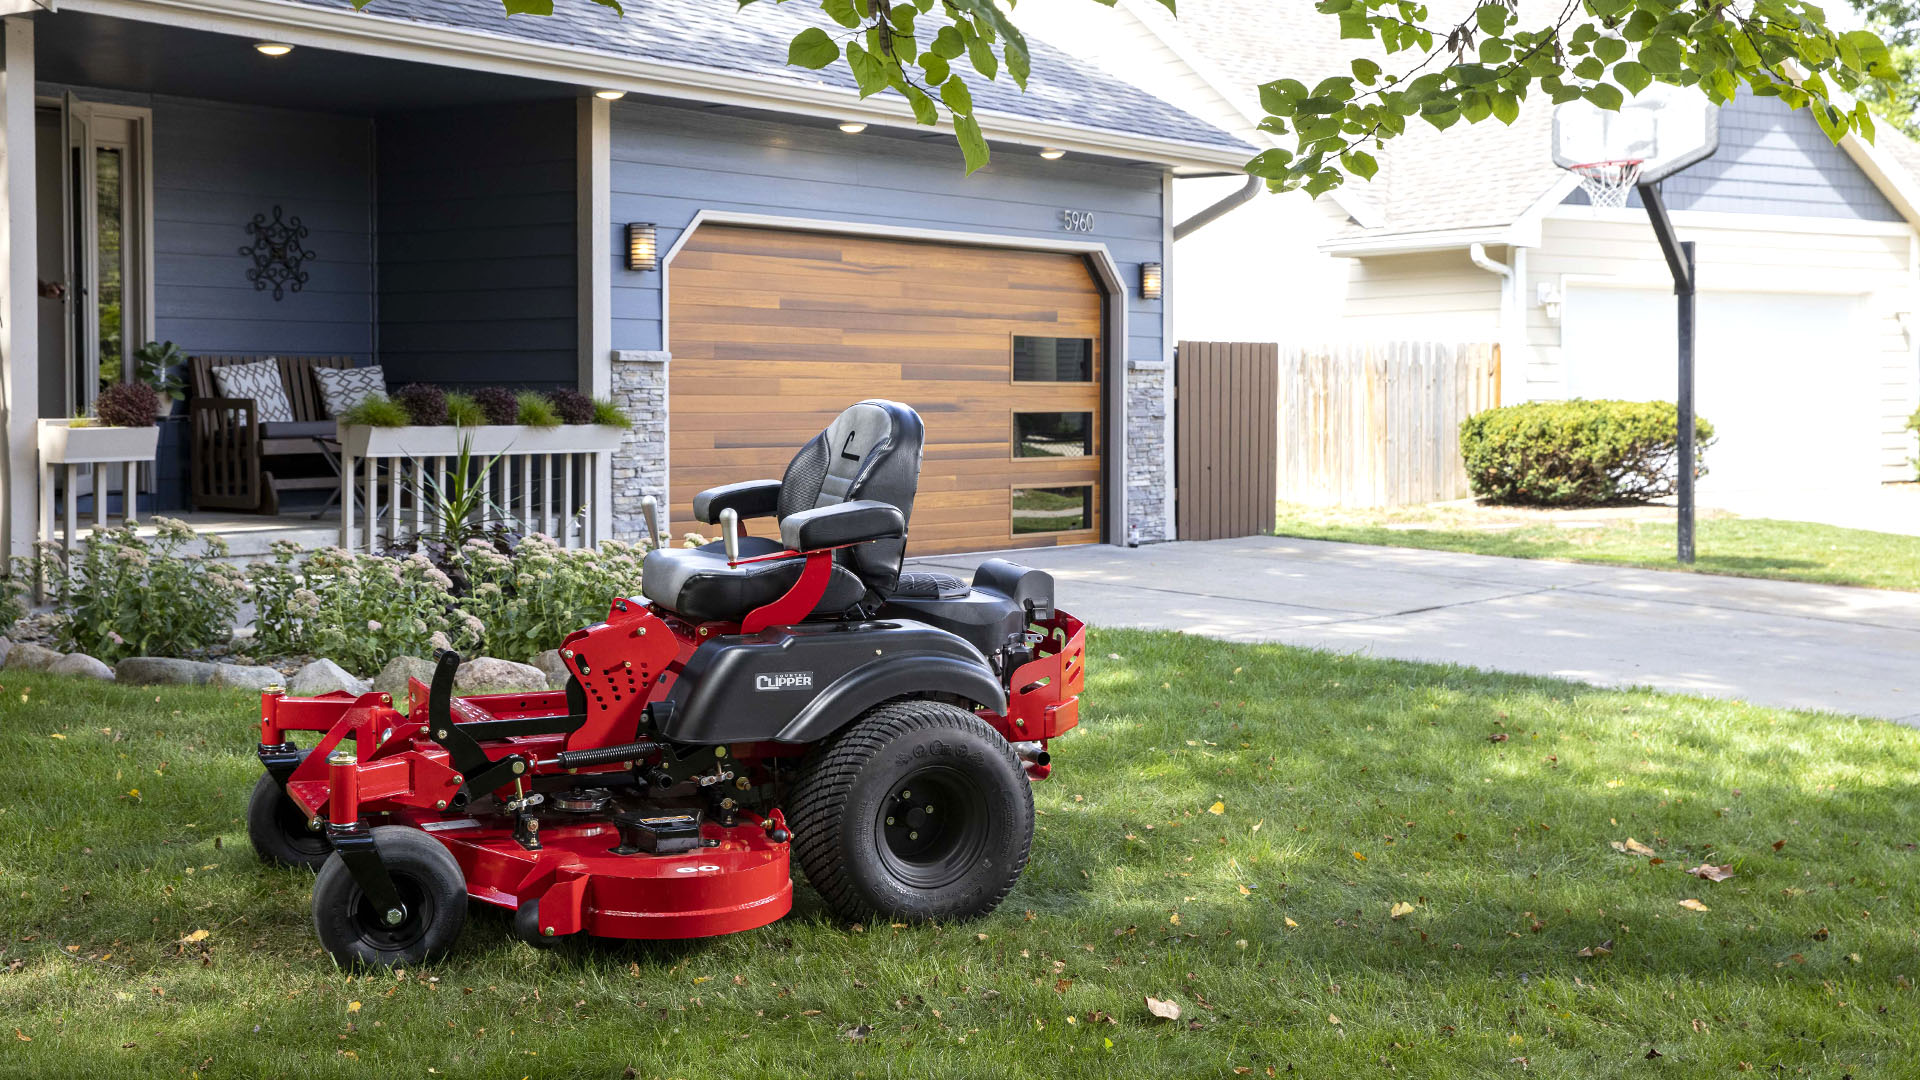 Country Clipper residential grade zero-turn mower with joystick steering in the front yard.